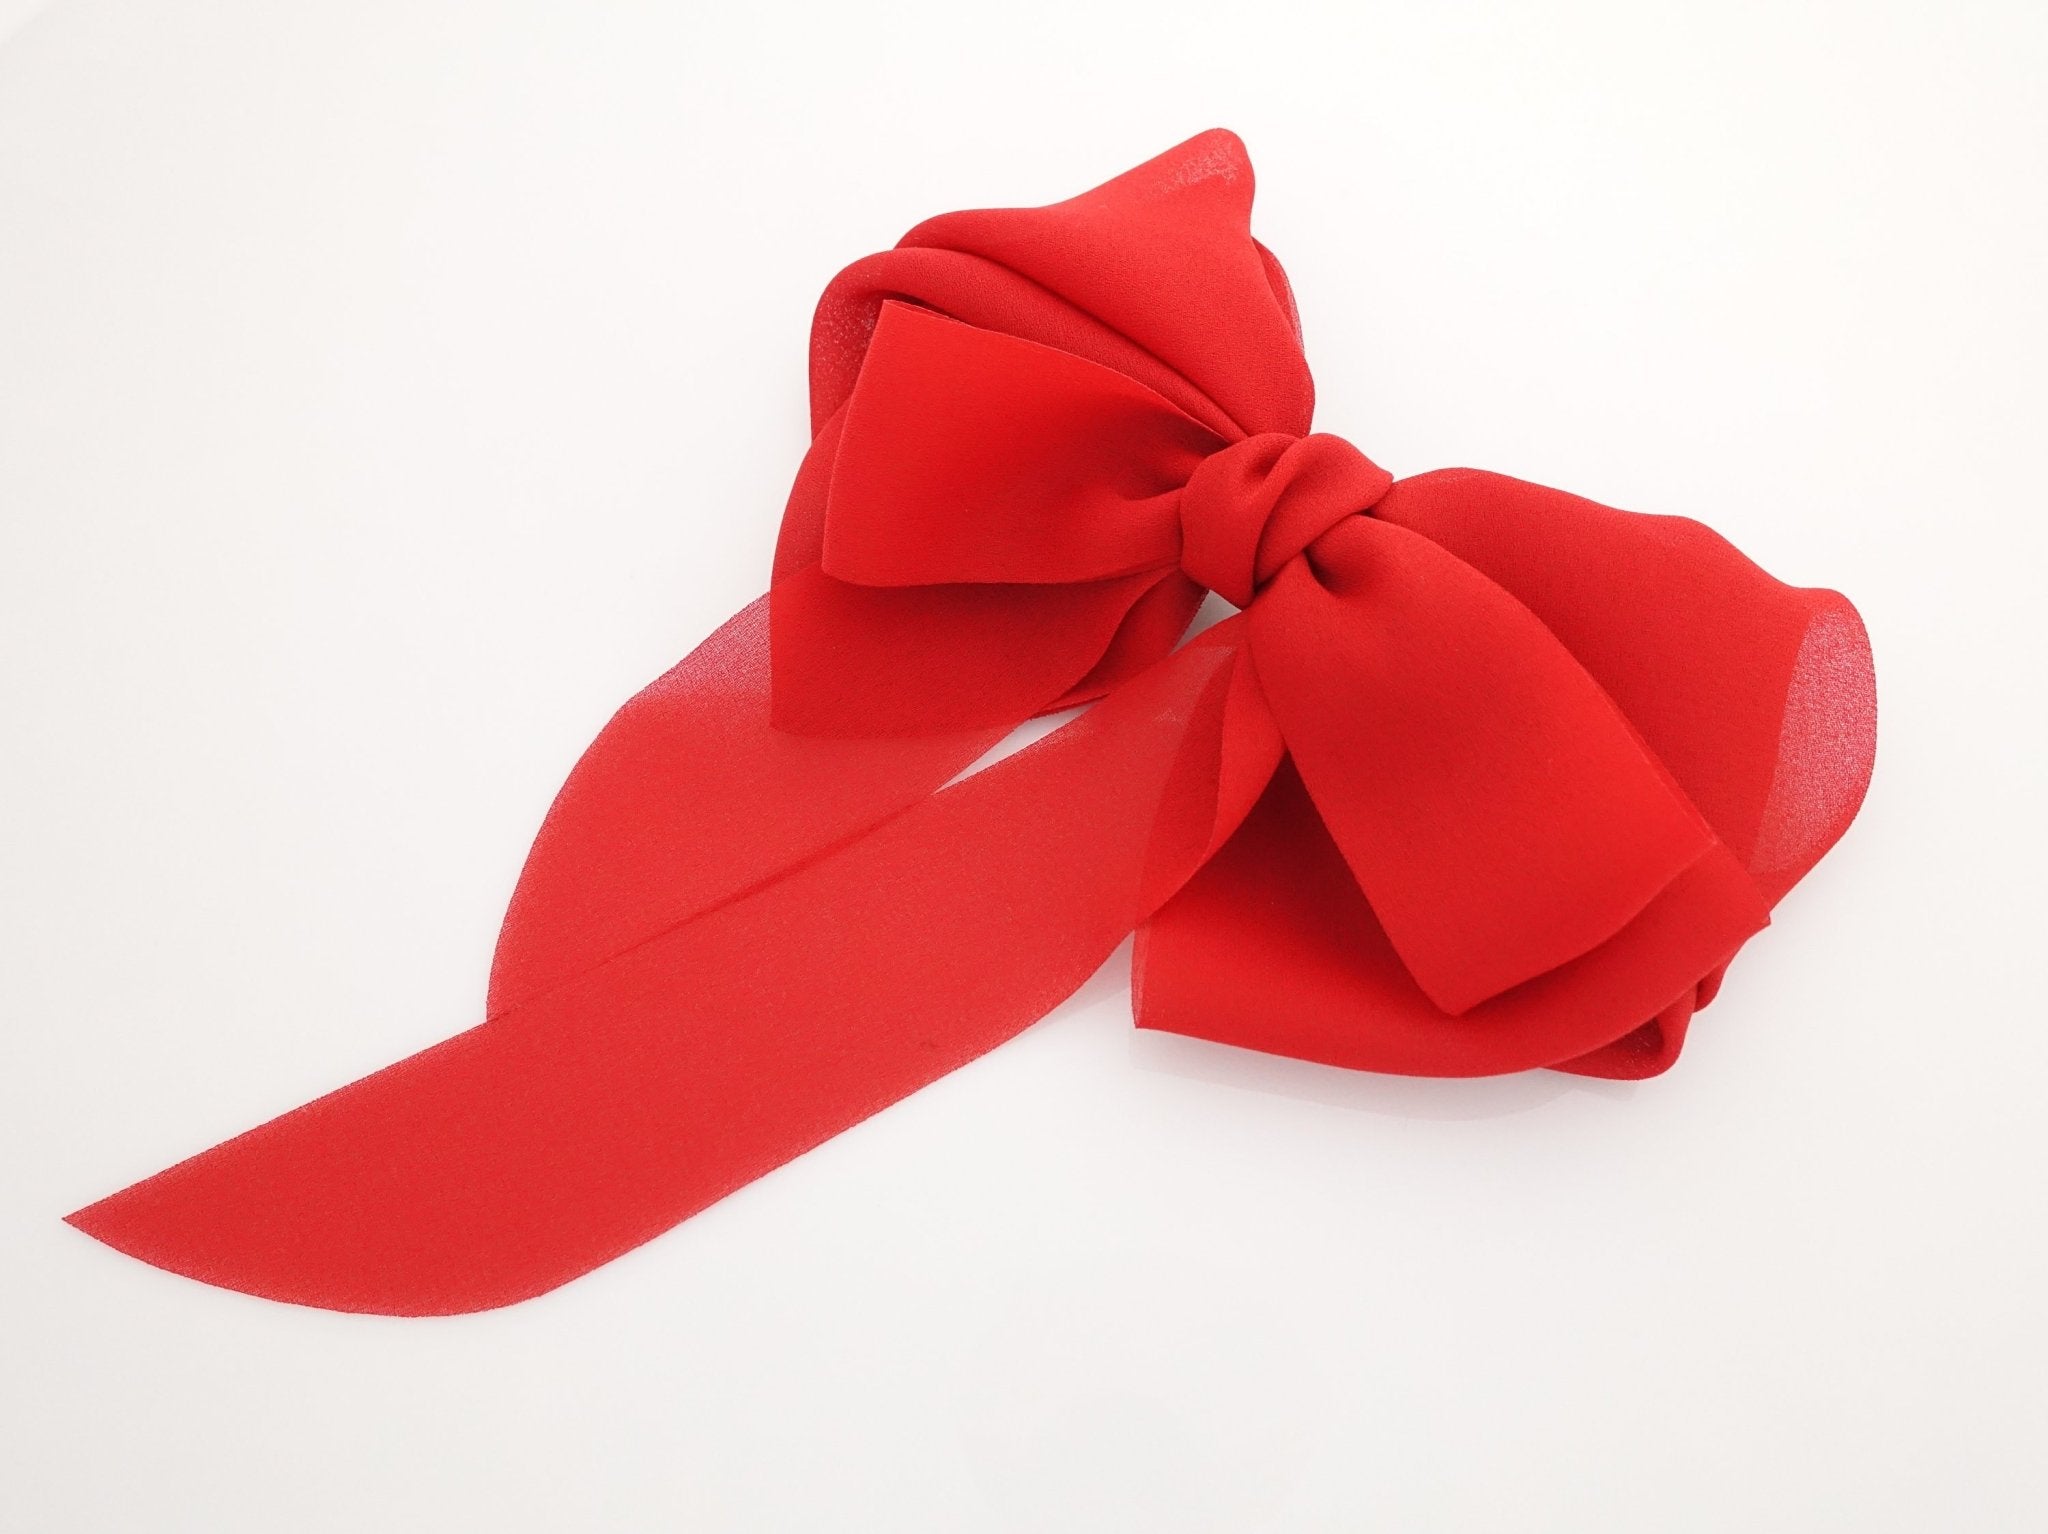 VeryShine Barrettes & Clips Red chiffon hair bow wing stacked style solid color VeryShine hair accessories for women